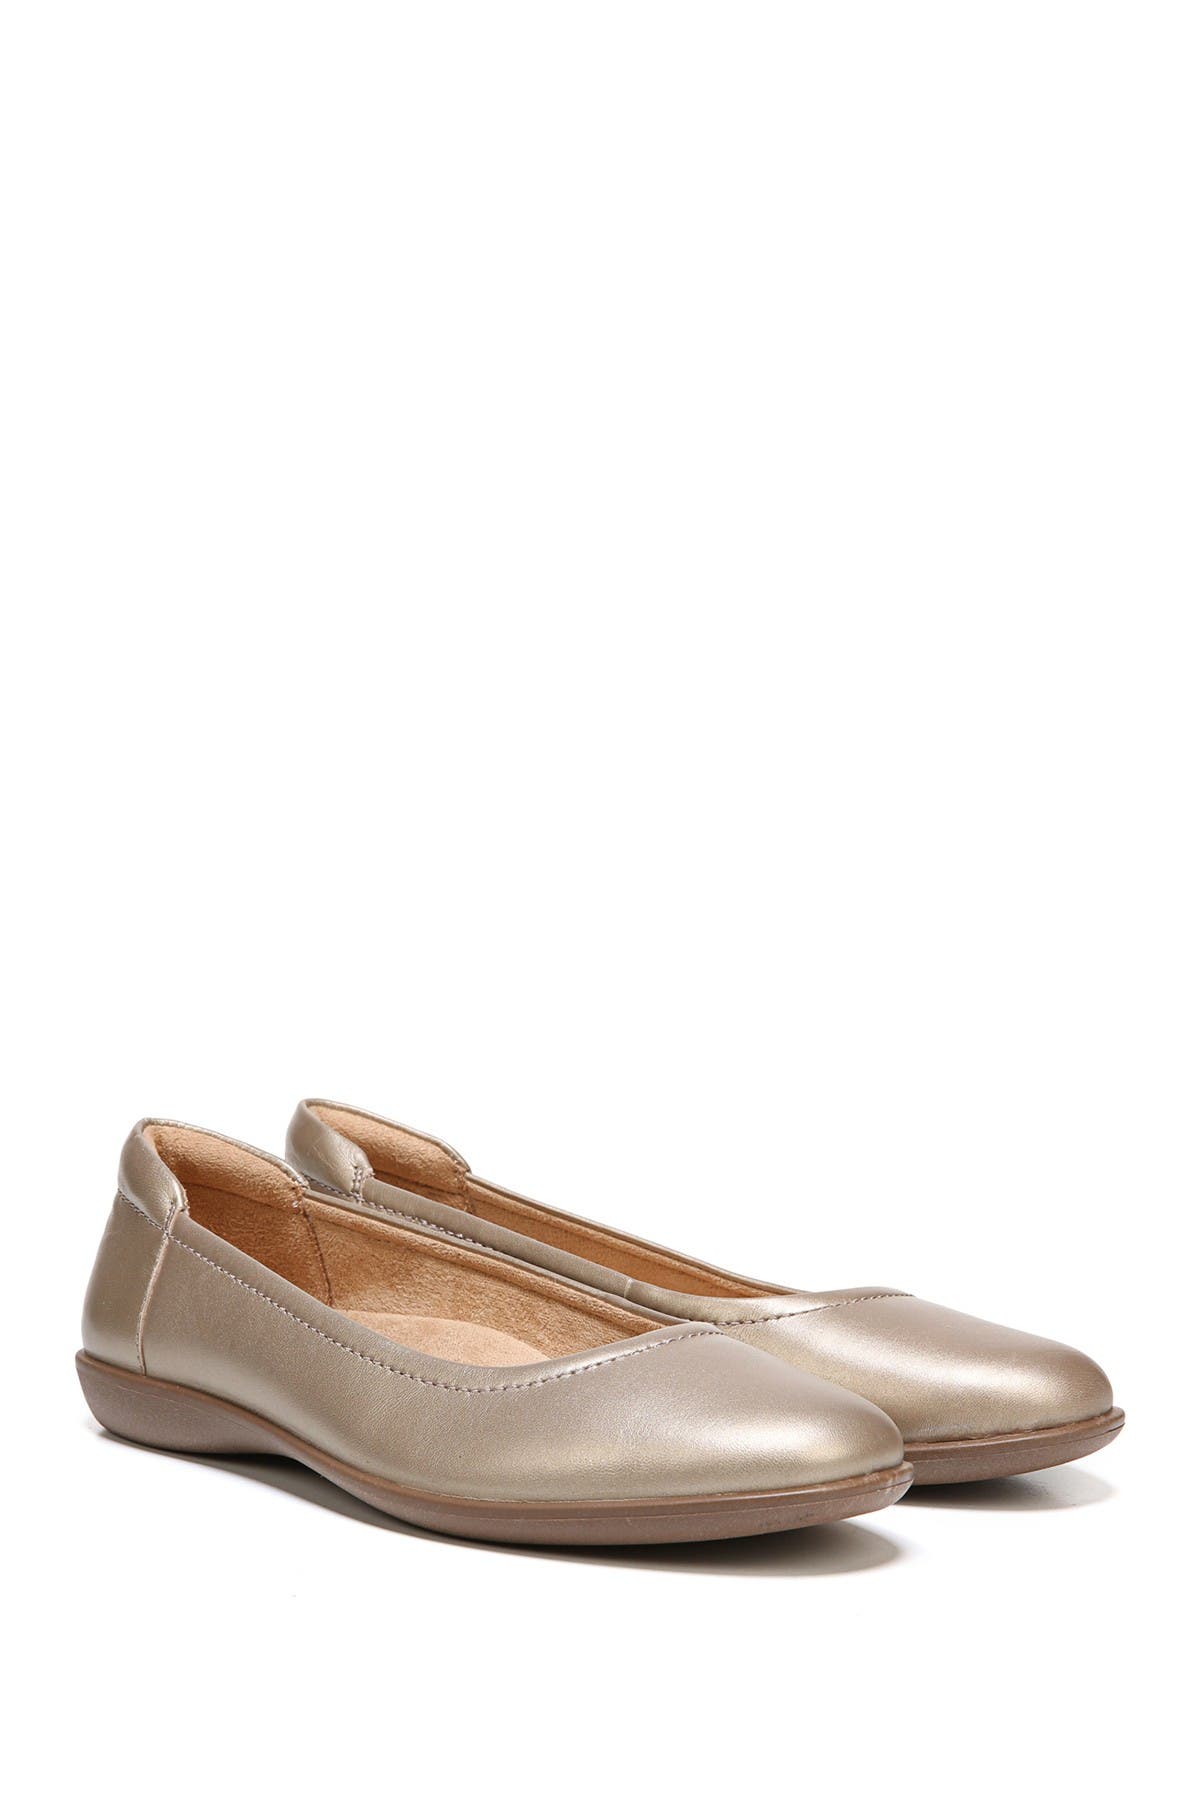 champagne colored shoes wide width